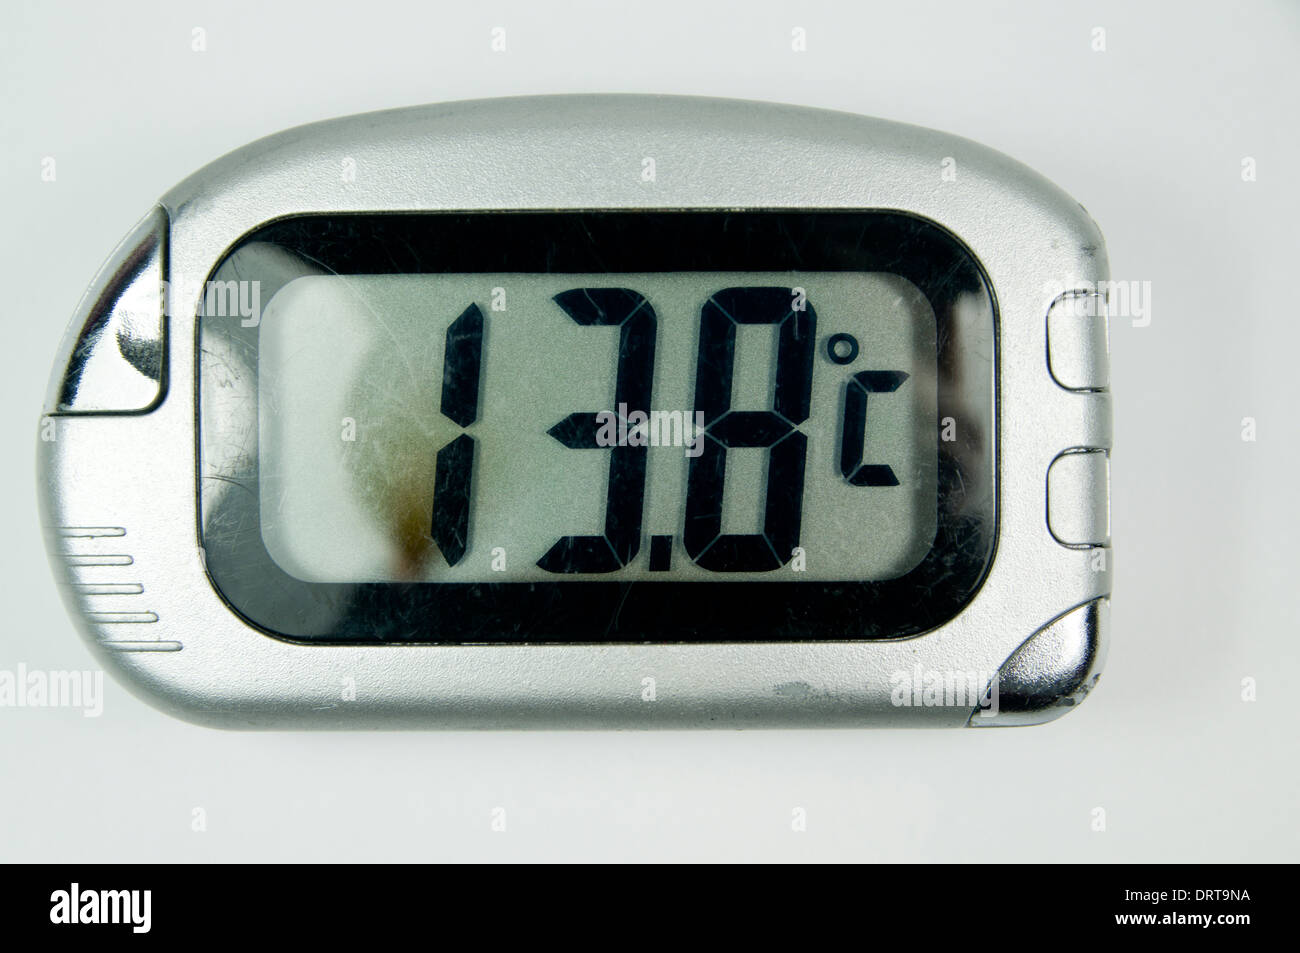 Digital thermometer showing 13.8 degrees C. Stock Photo